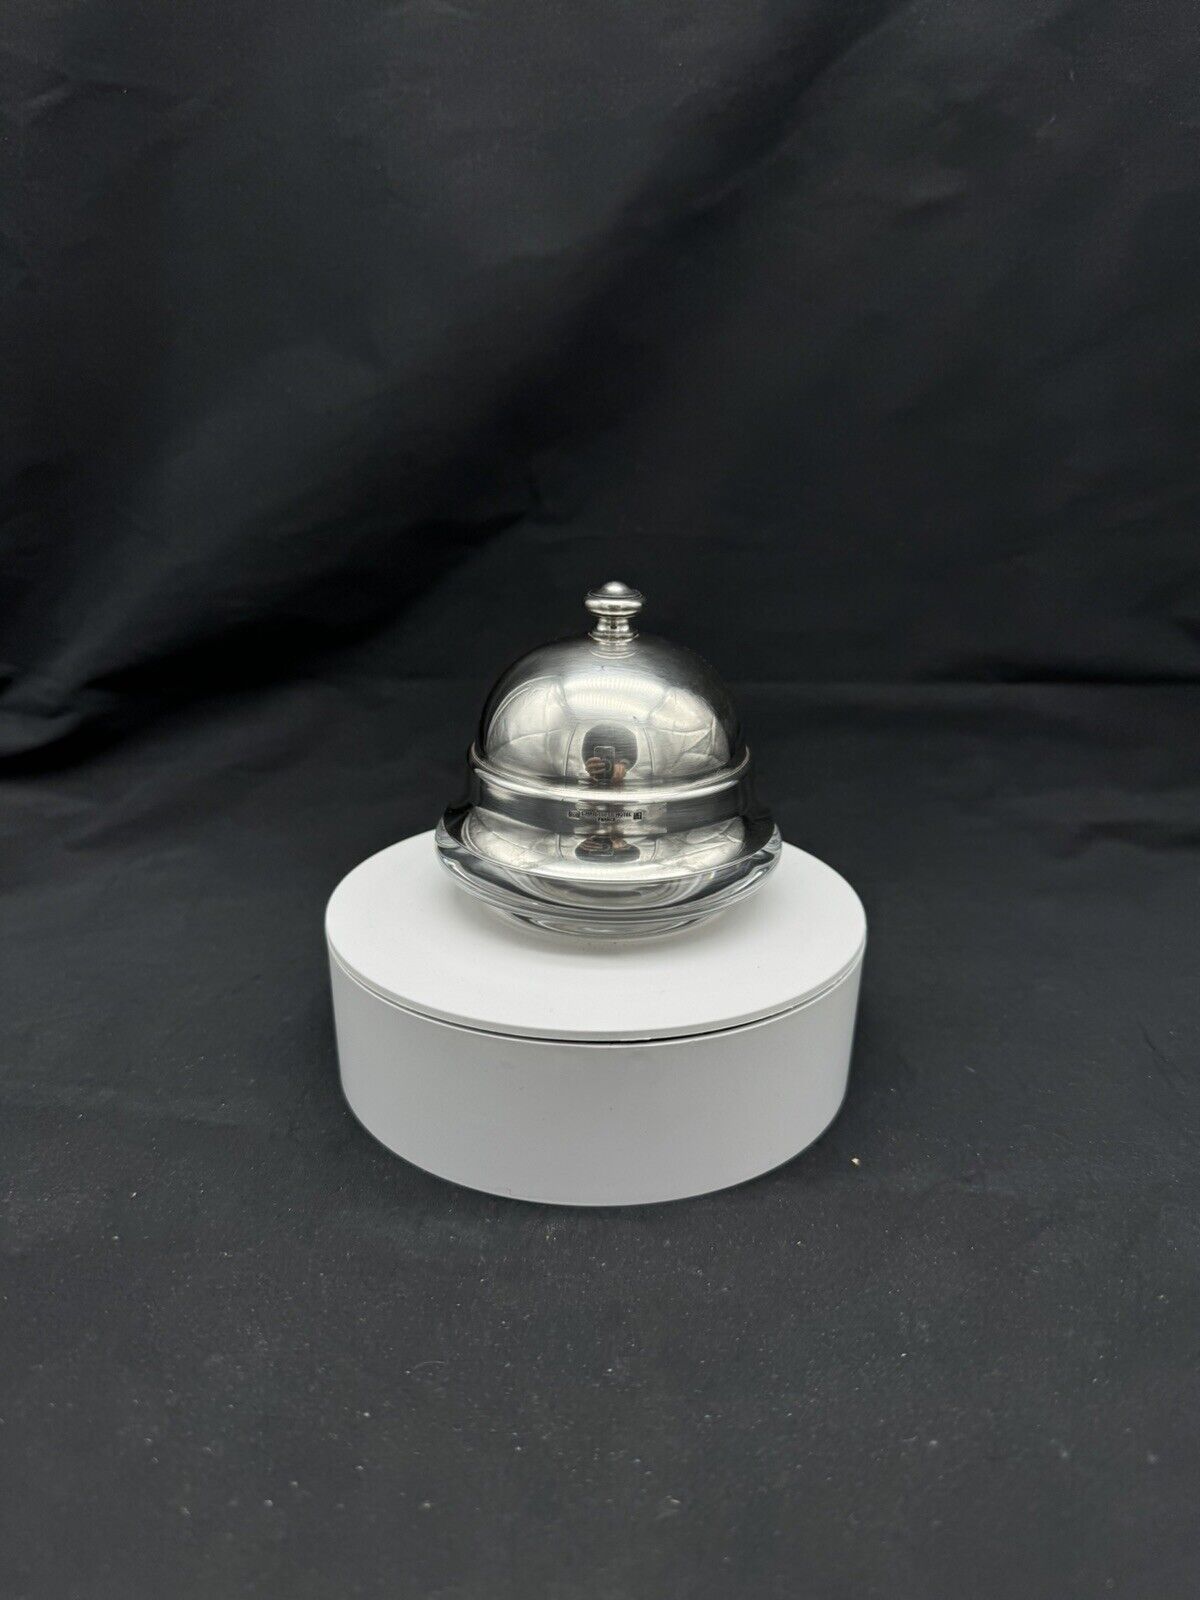 CHRISTOFLE HOTEL SILVER-PLATED PERSONAL LIDDED BUTTER DISH, FRANCE